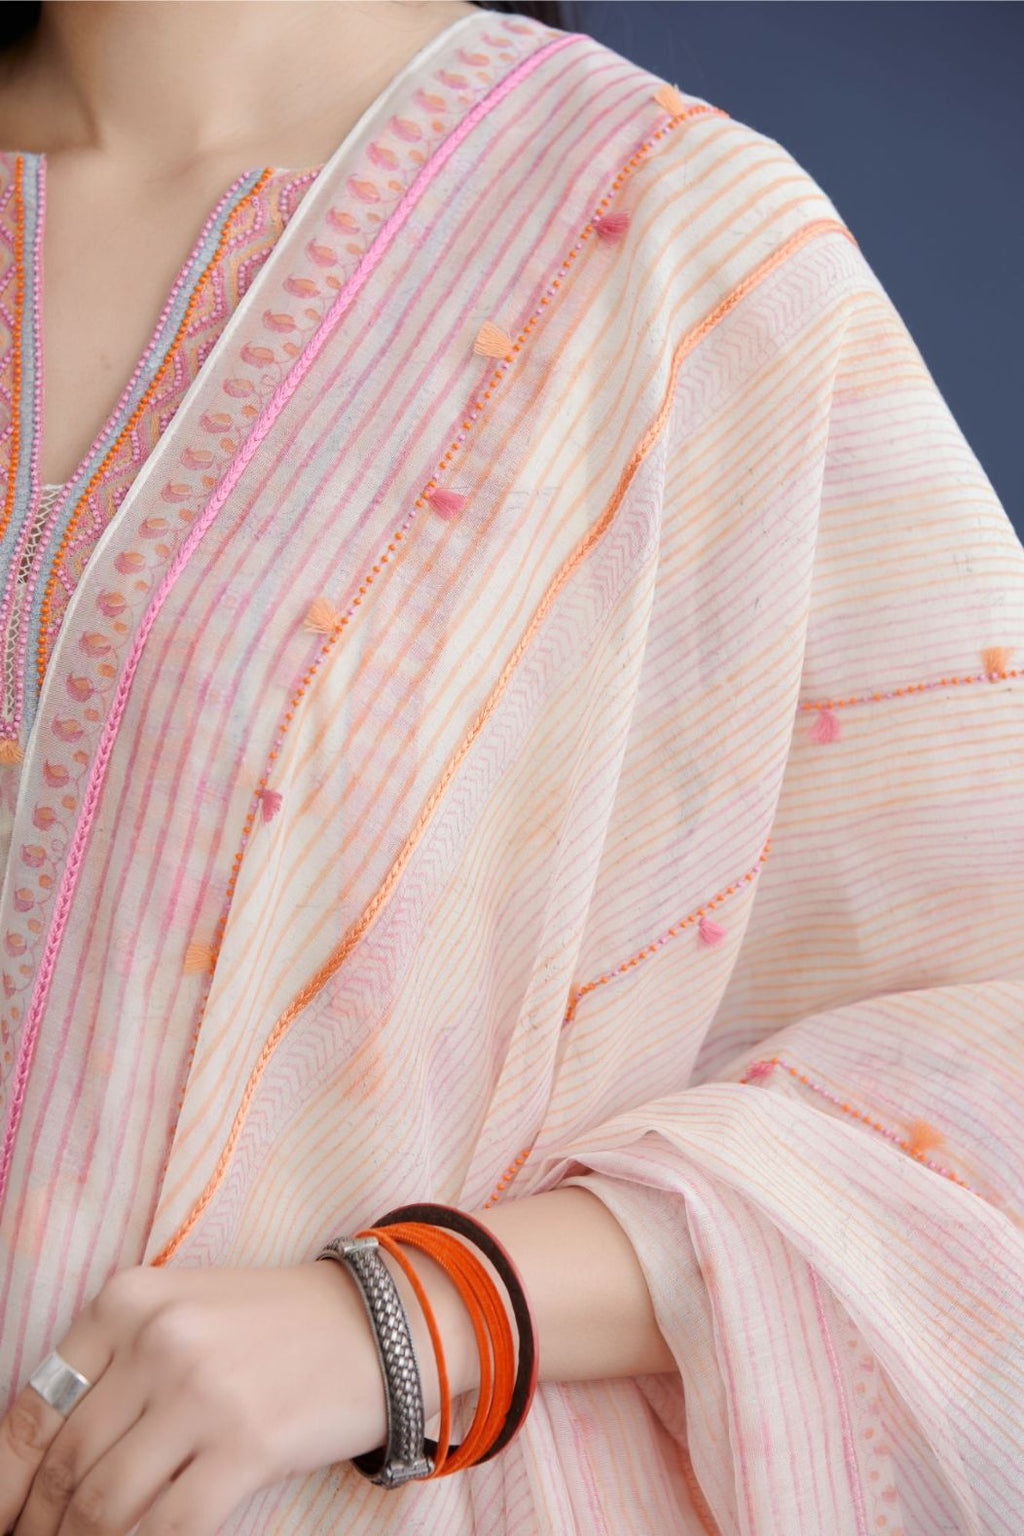 Off white cotton Chanderi dupatta with all over pink and orange hand block print, highlighted with bead and thread tassel embroidery